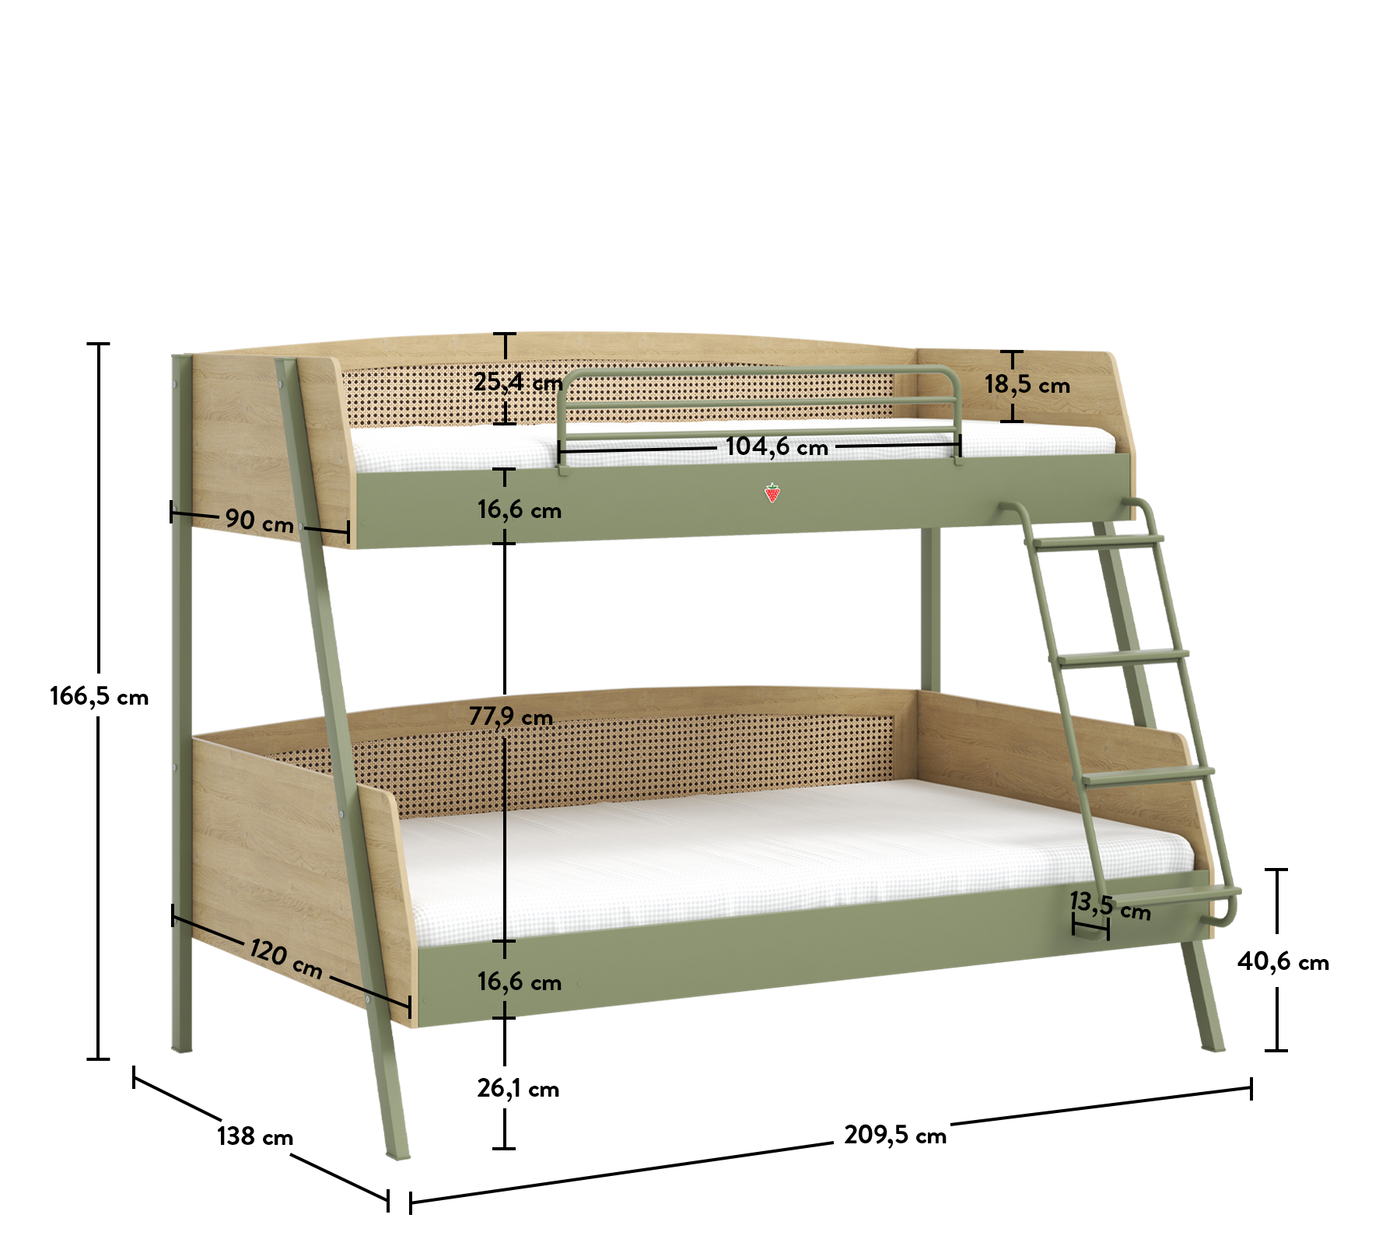 Loof Large Bunk Bed (90x200-120x200 cm)